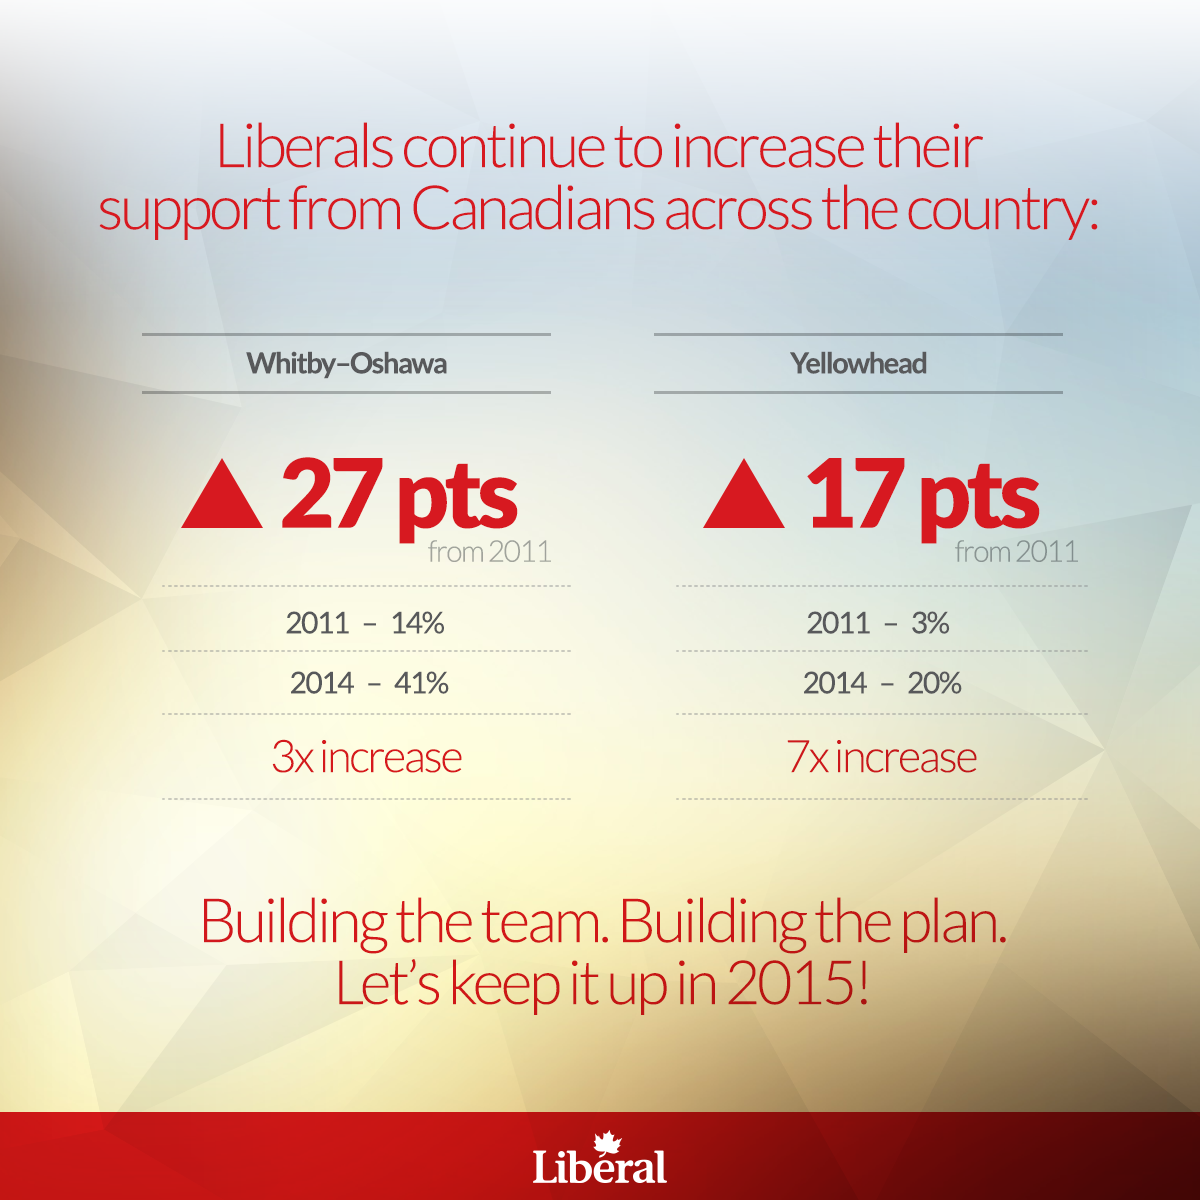 Liberals continue to increase their support from Canadians across the country: Whitby-Oshawa up 27 points from 2011. 2011 - 14%. 2014 - 41%. 3x increase. Yellowhead up 17 points from 2011. 2011 - 3%. 2014 - 20%. 7x increase. Building the team. Building the plan. Let's keep it up in 2015!